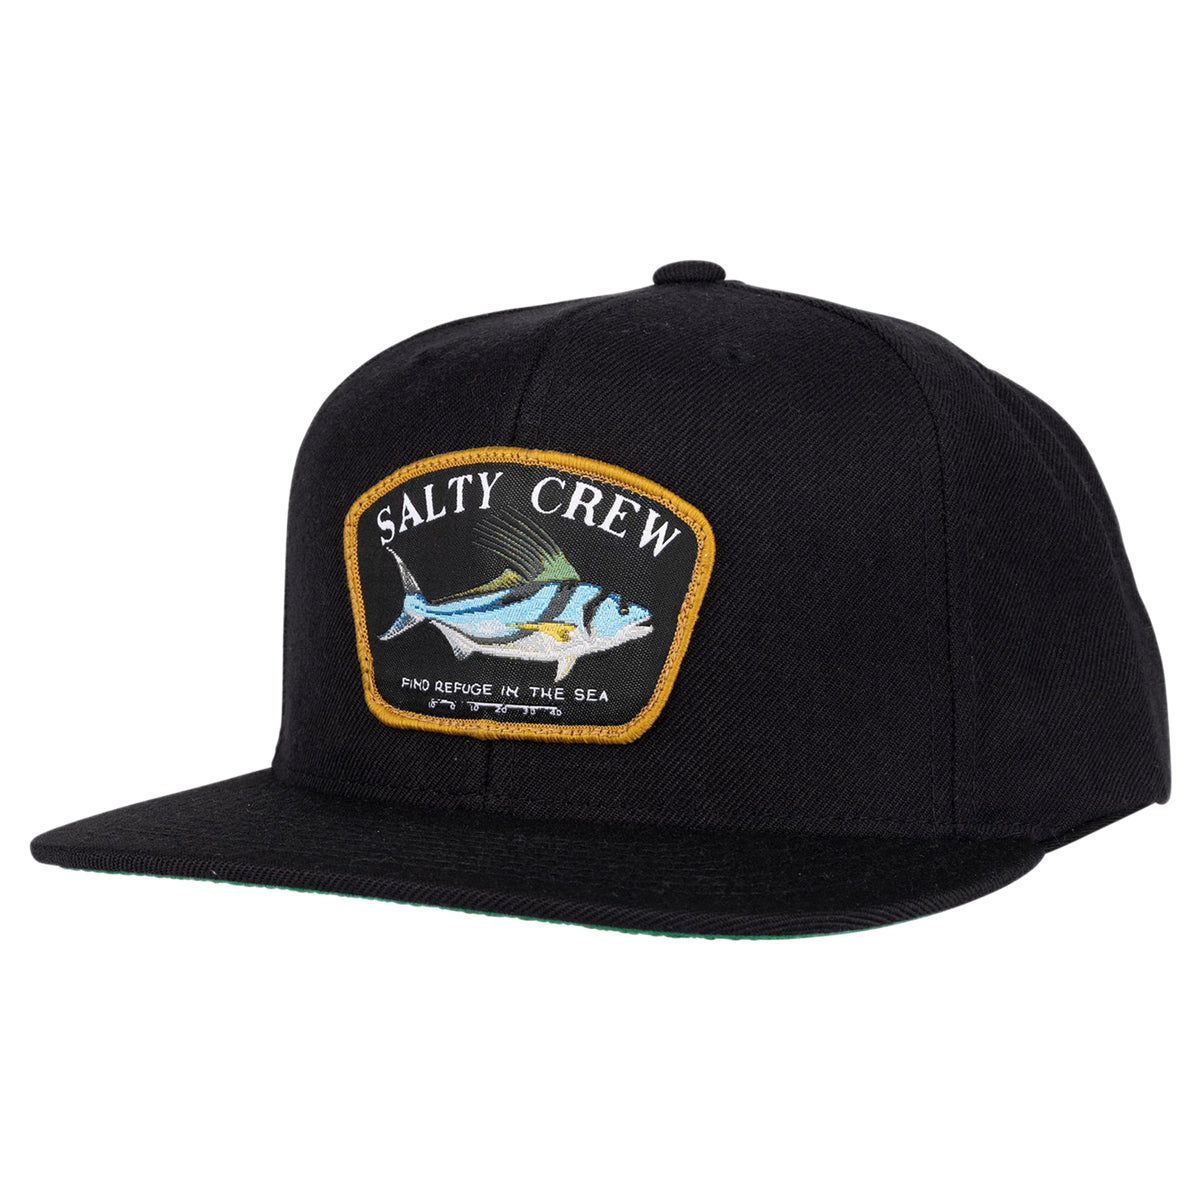 Salty Crew Rooster 6 Panel Hat - Black image 1